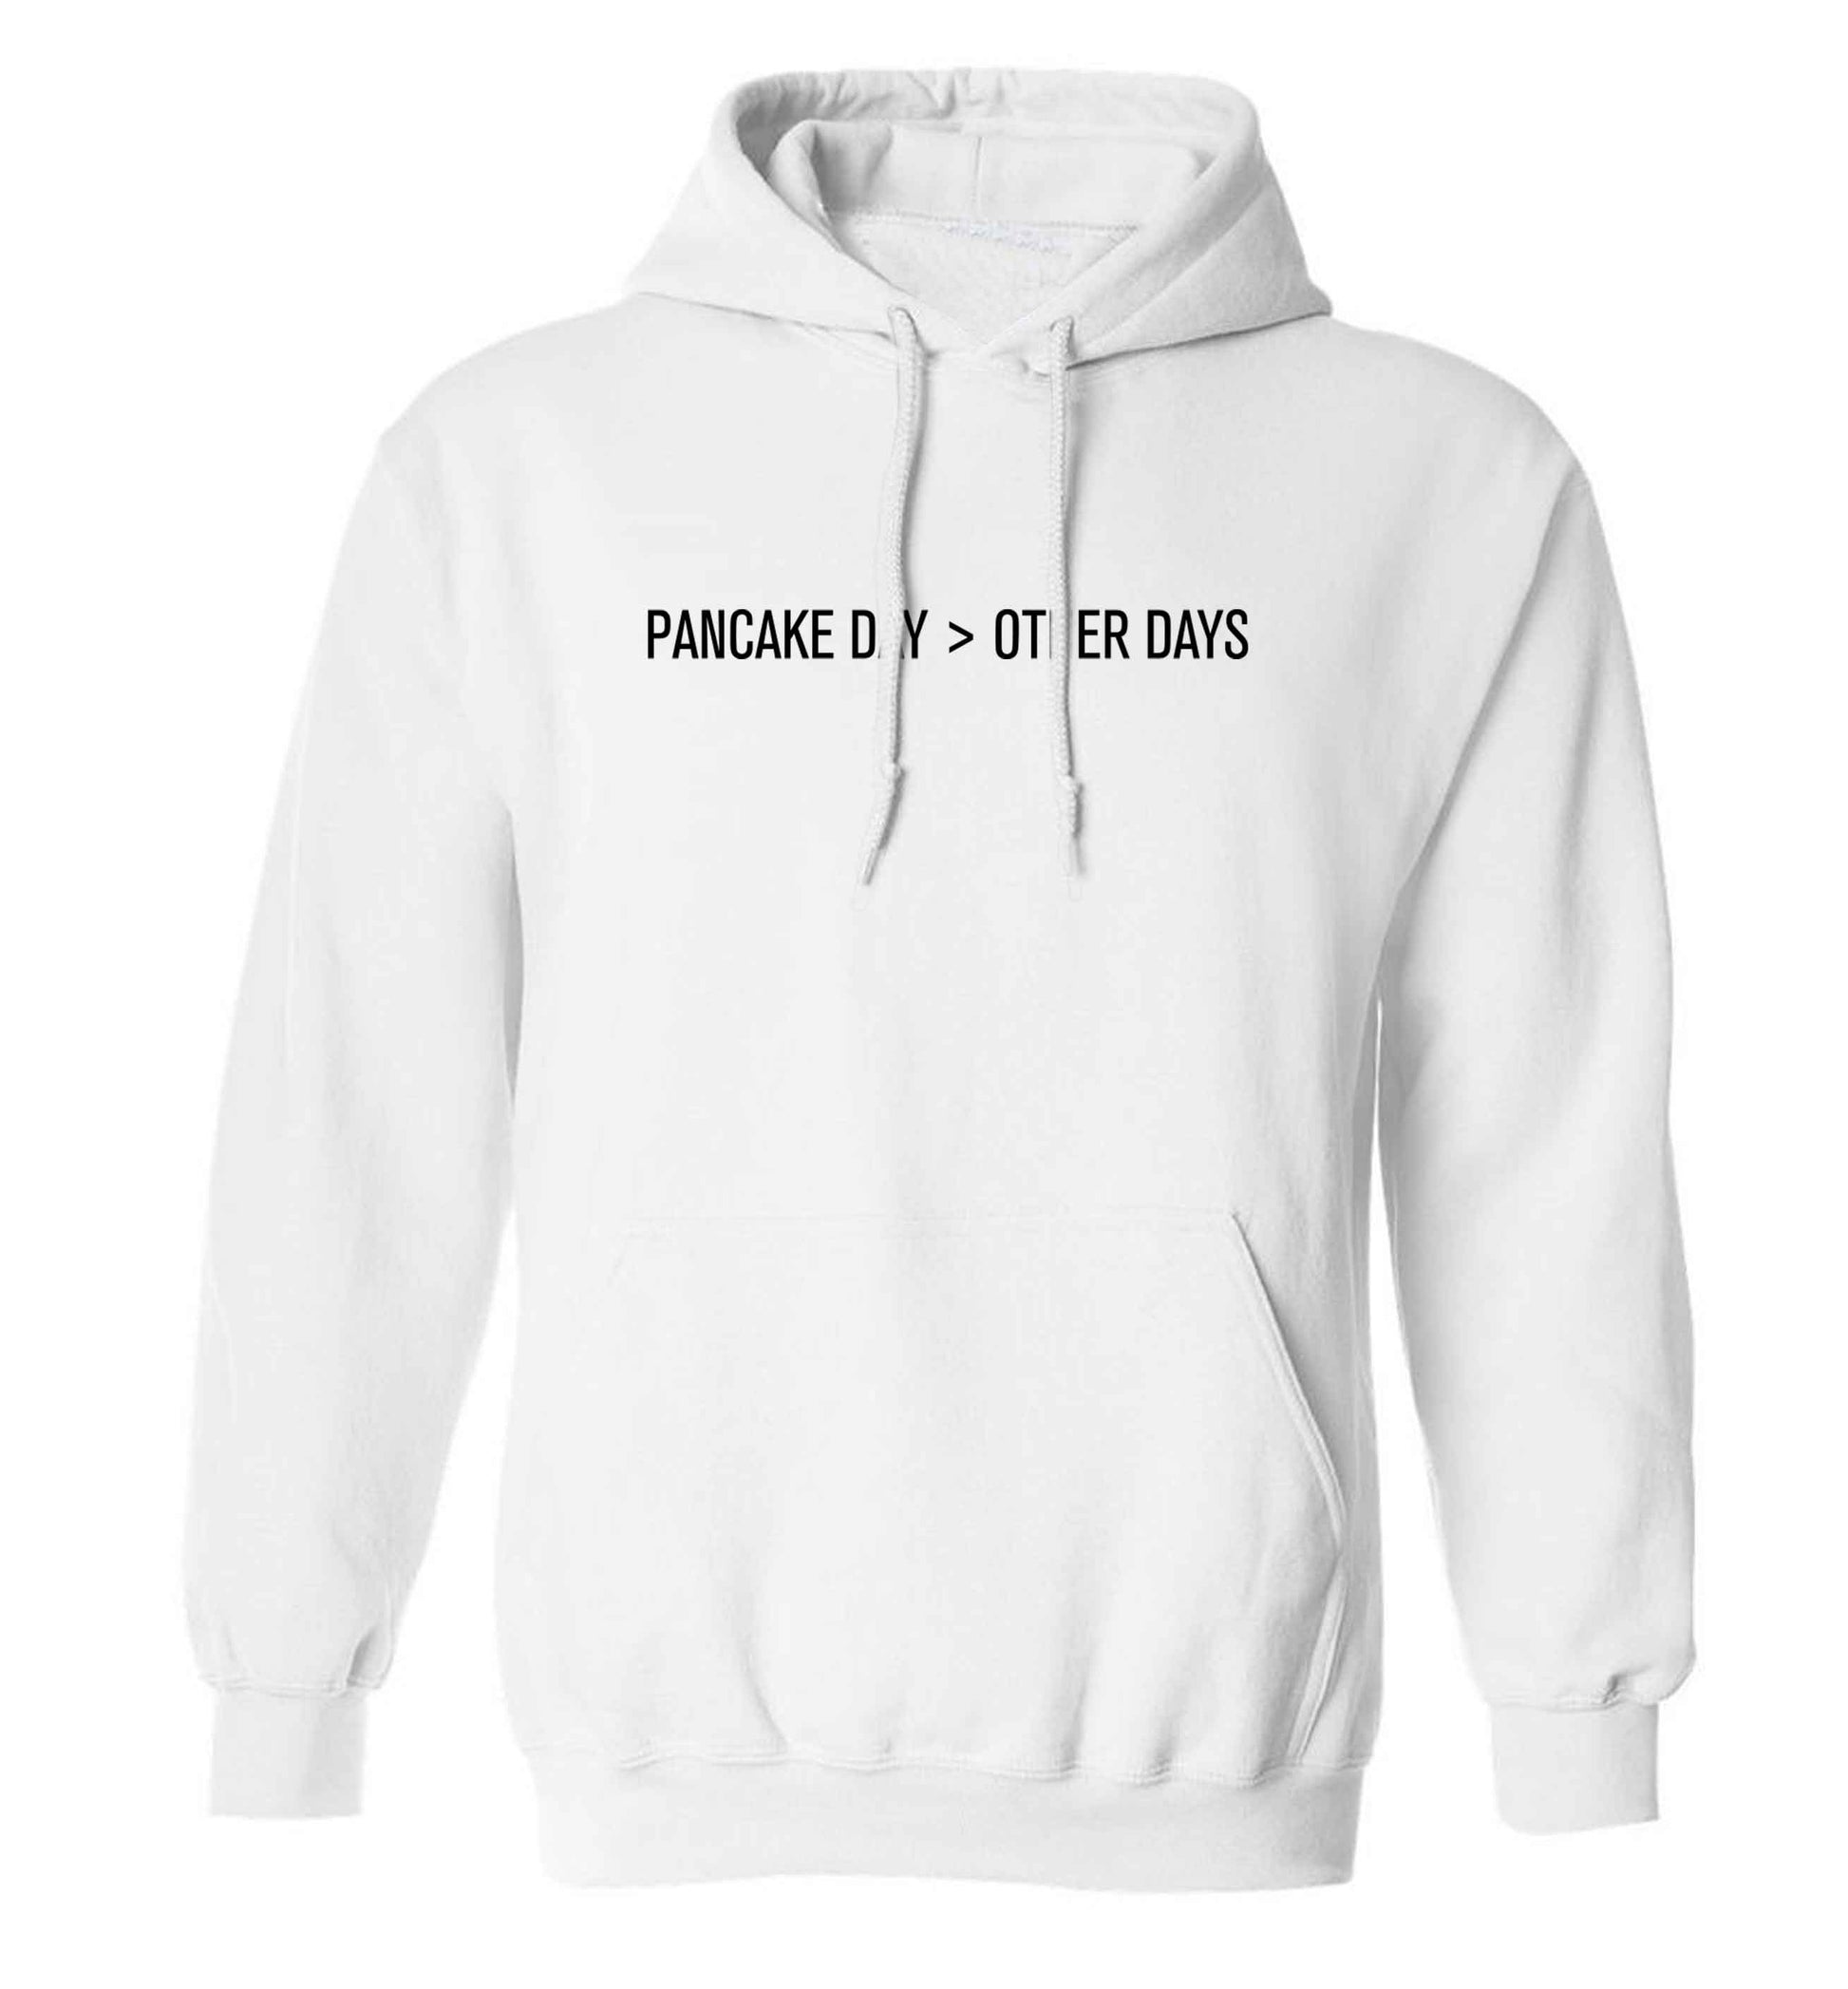 Pancake day > other days adults unisex white hoodie 2XL